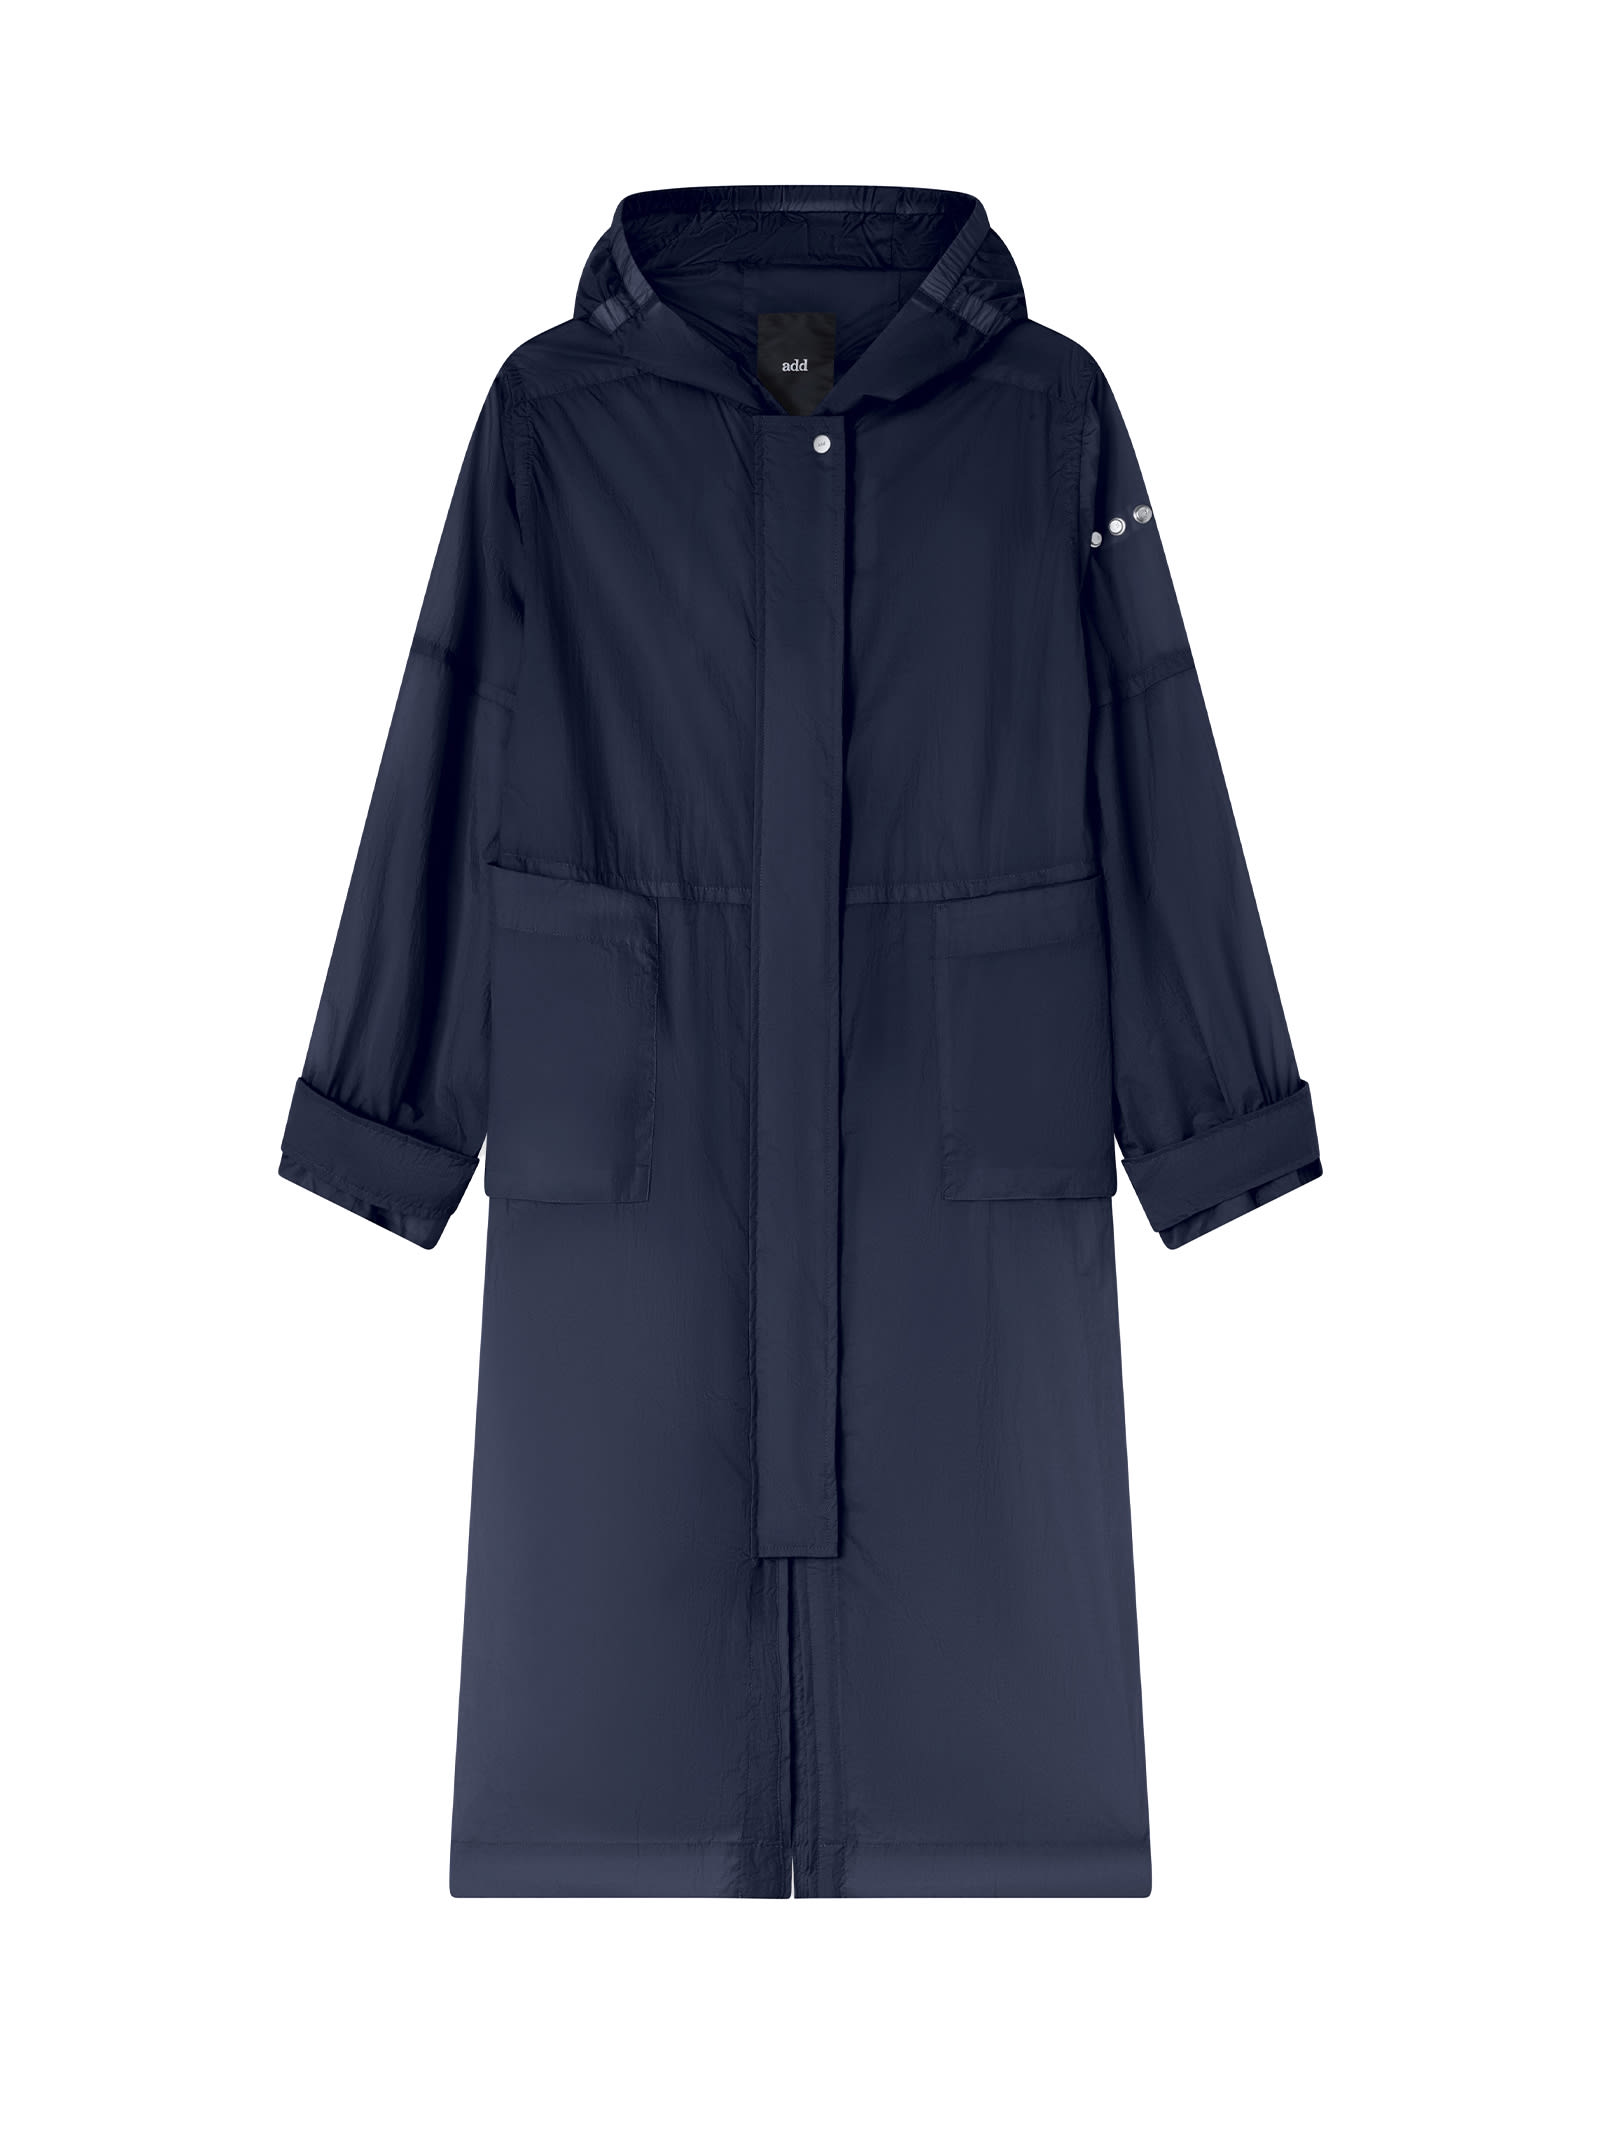 Long Navy Blue Parka With Hood